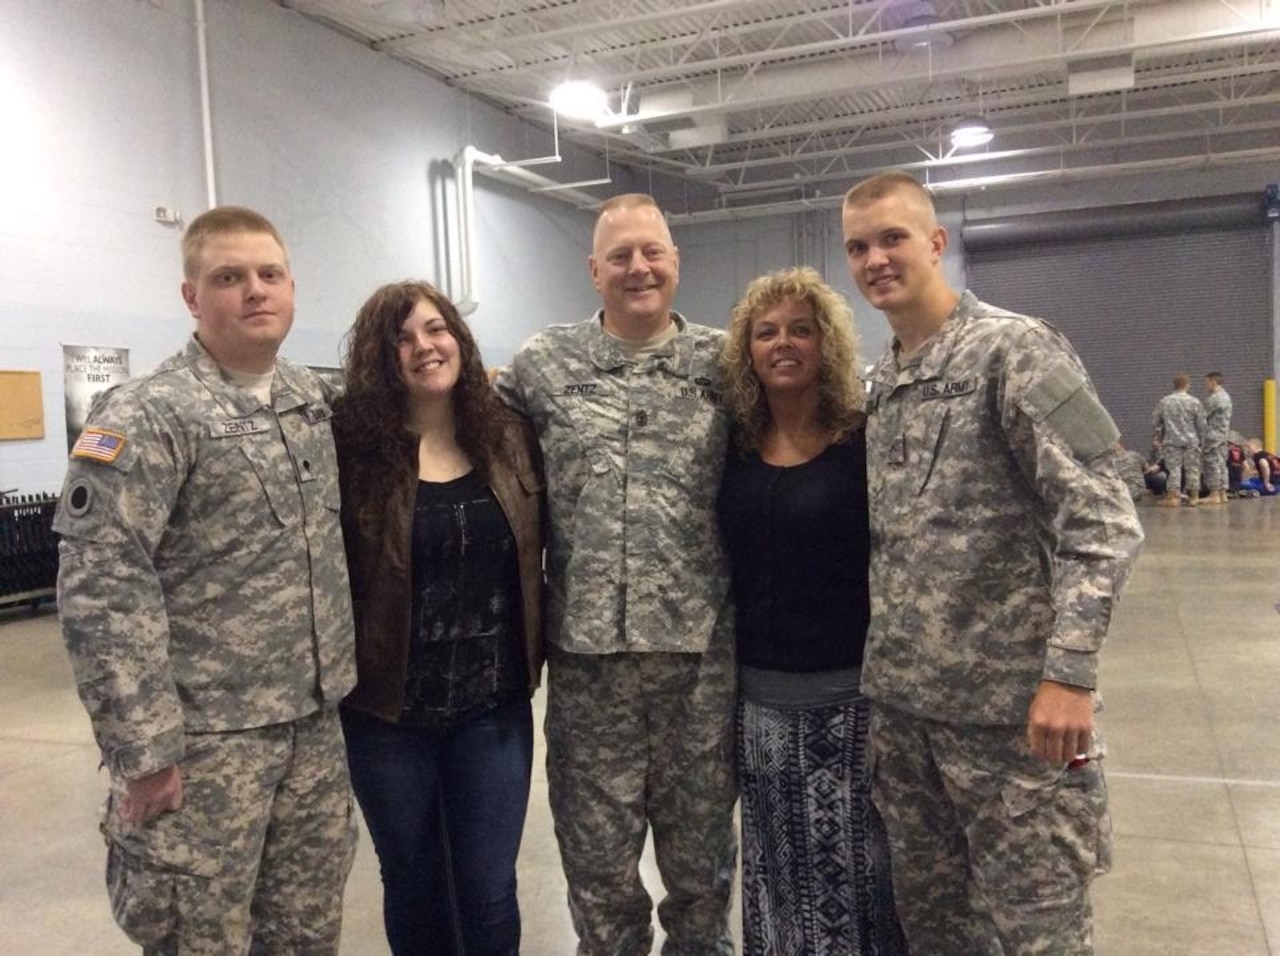 A military family poses for a photo.